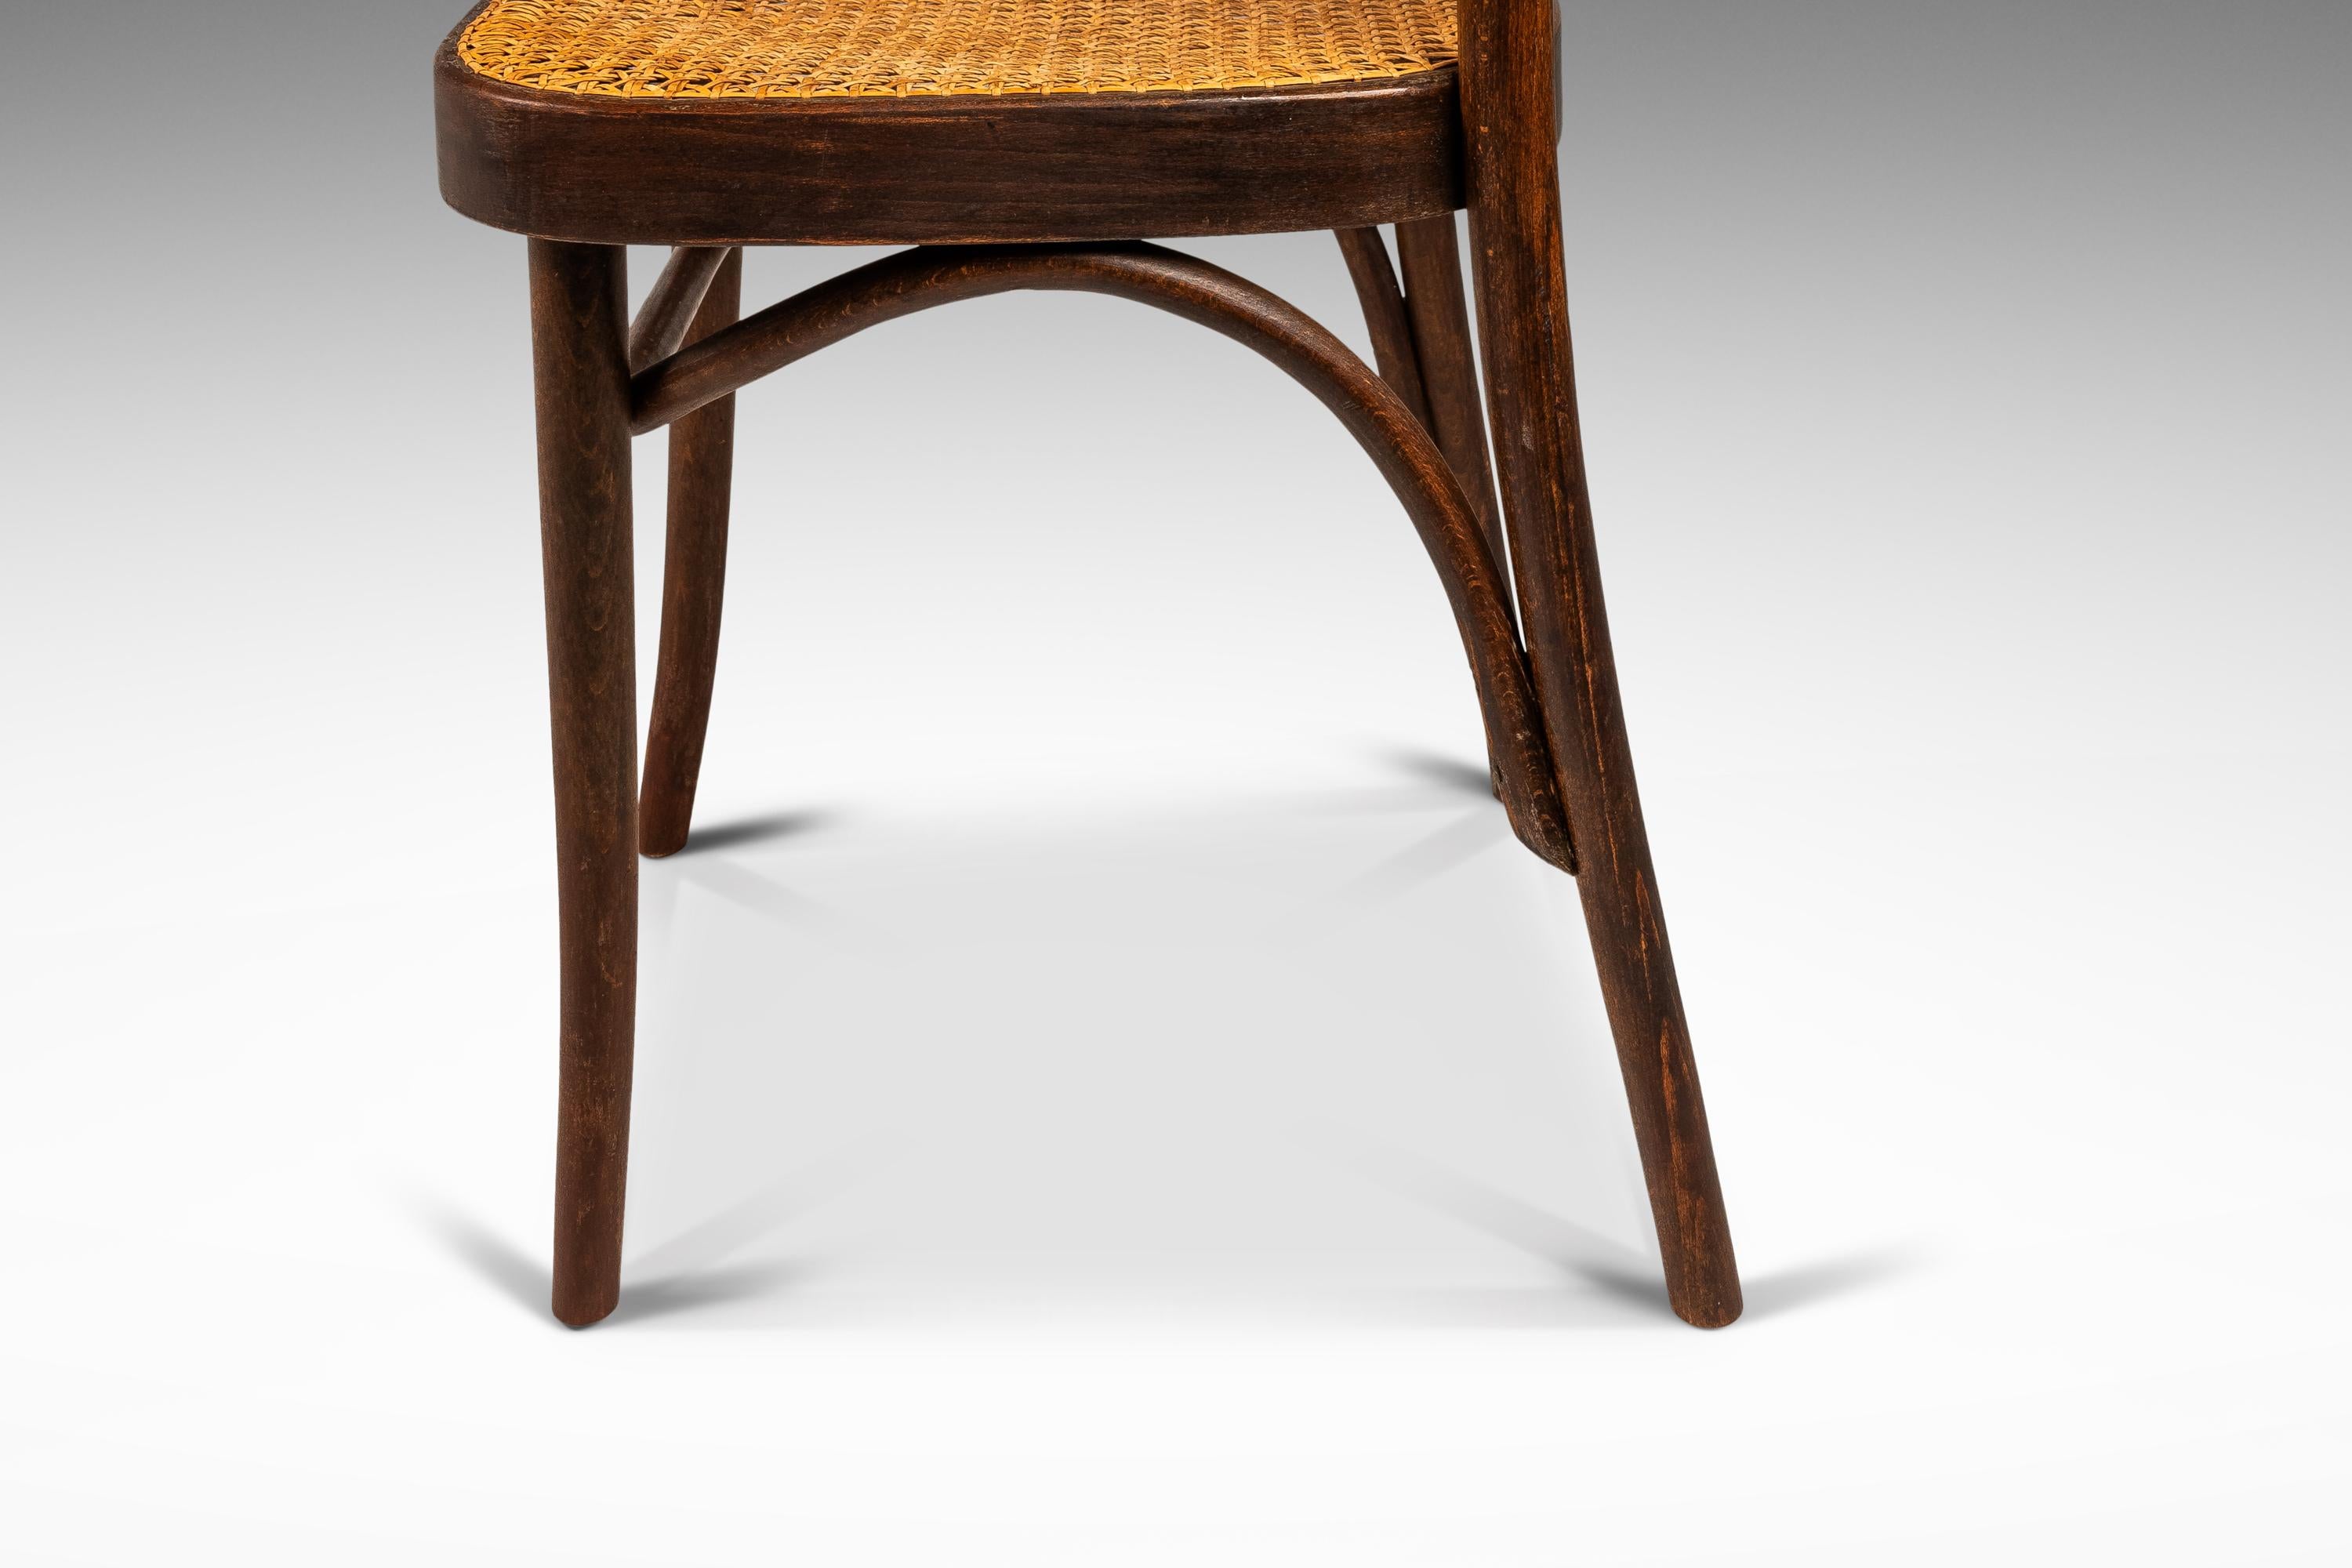 Bentwood Prague Model 811 Chair in Walnut by Josef Frank, Poland, c. 1960s For Sale 10